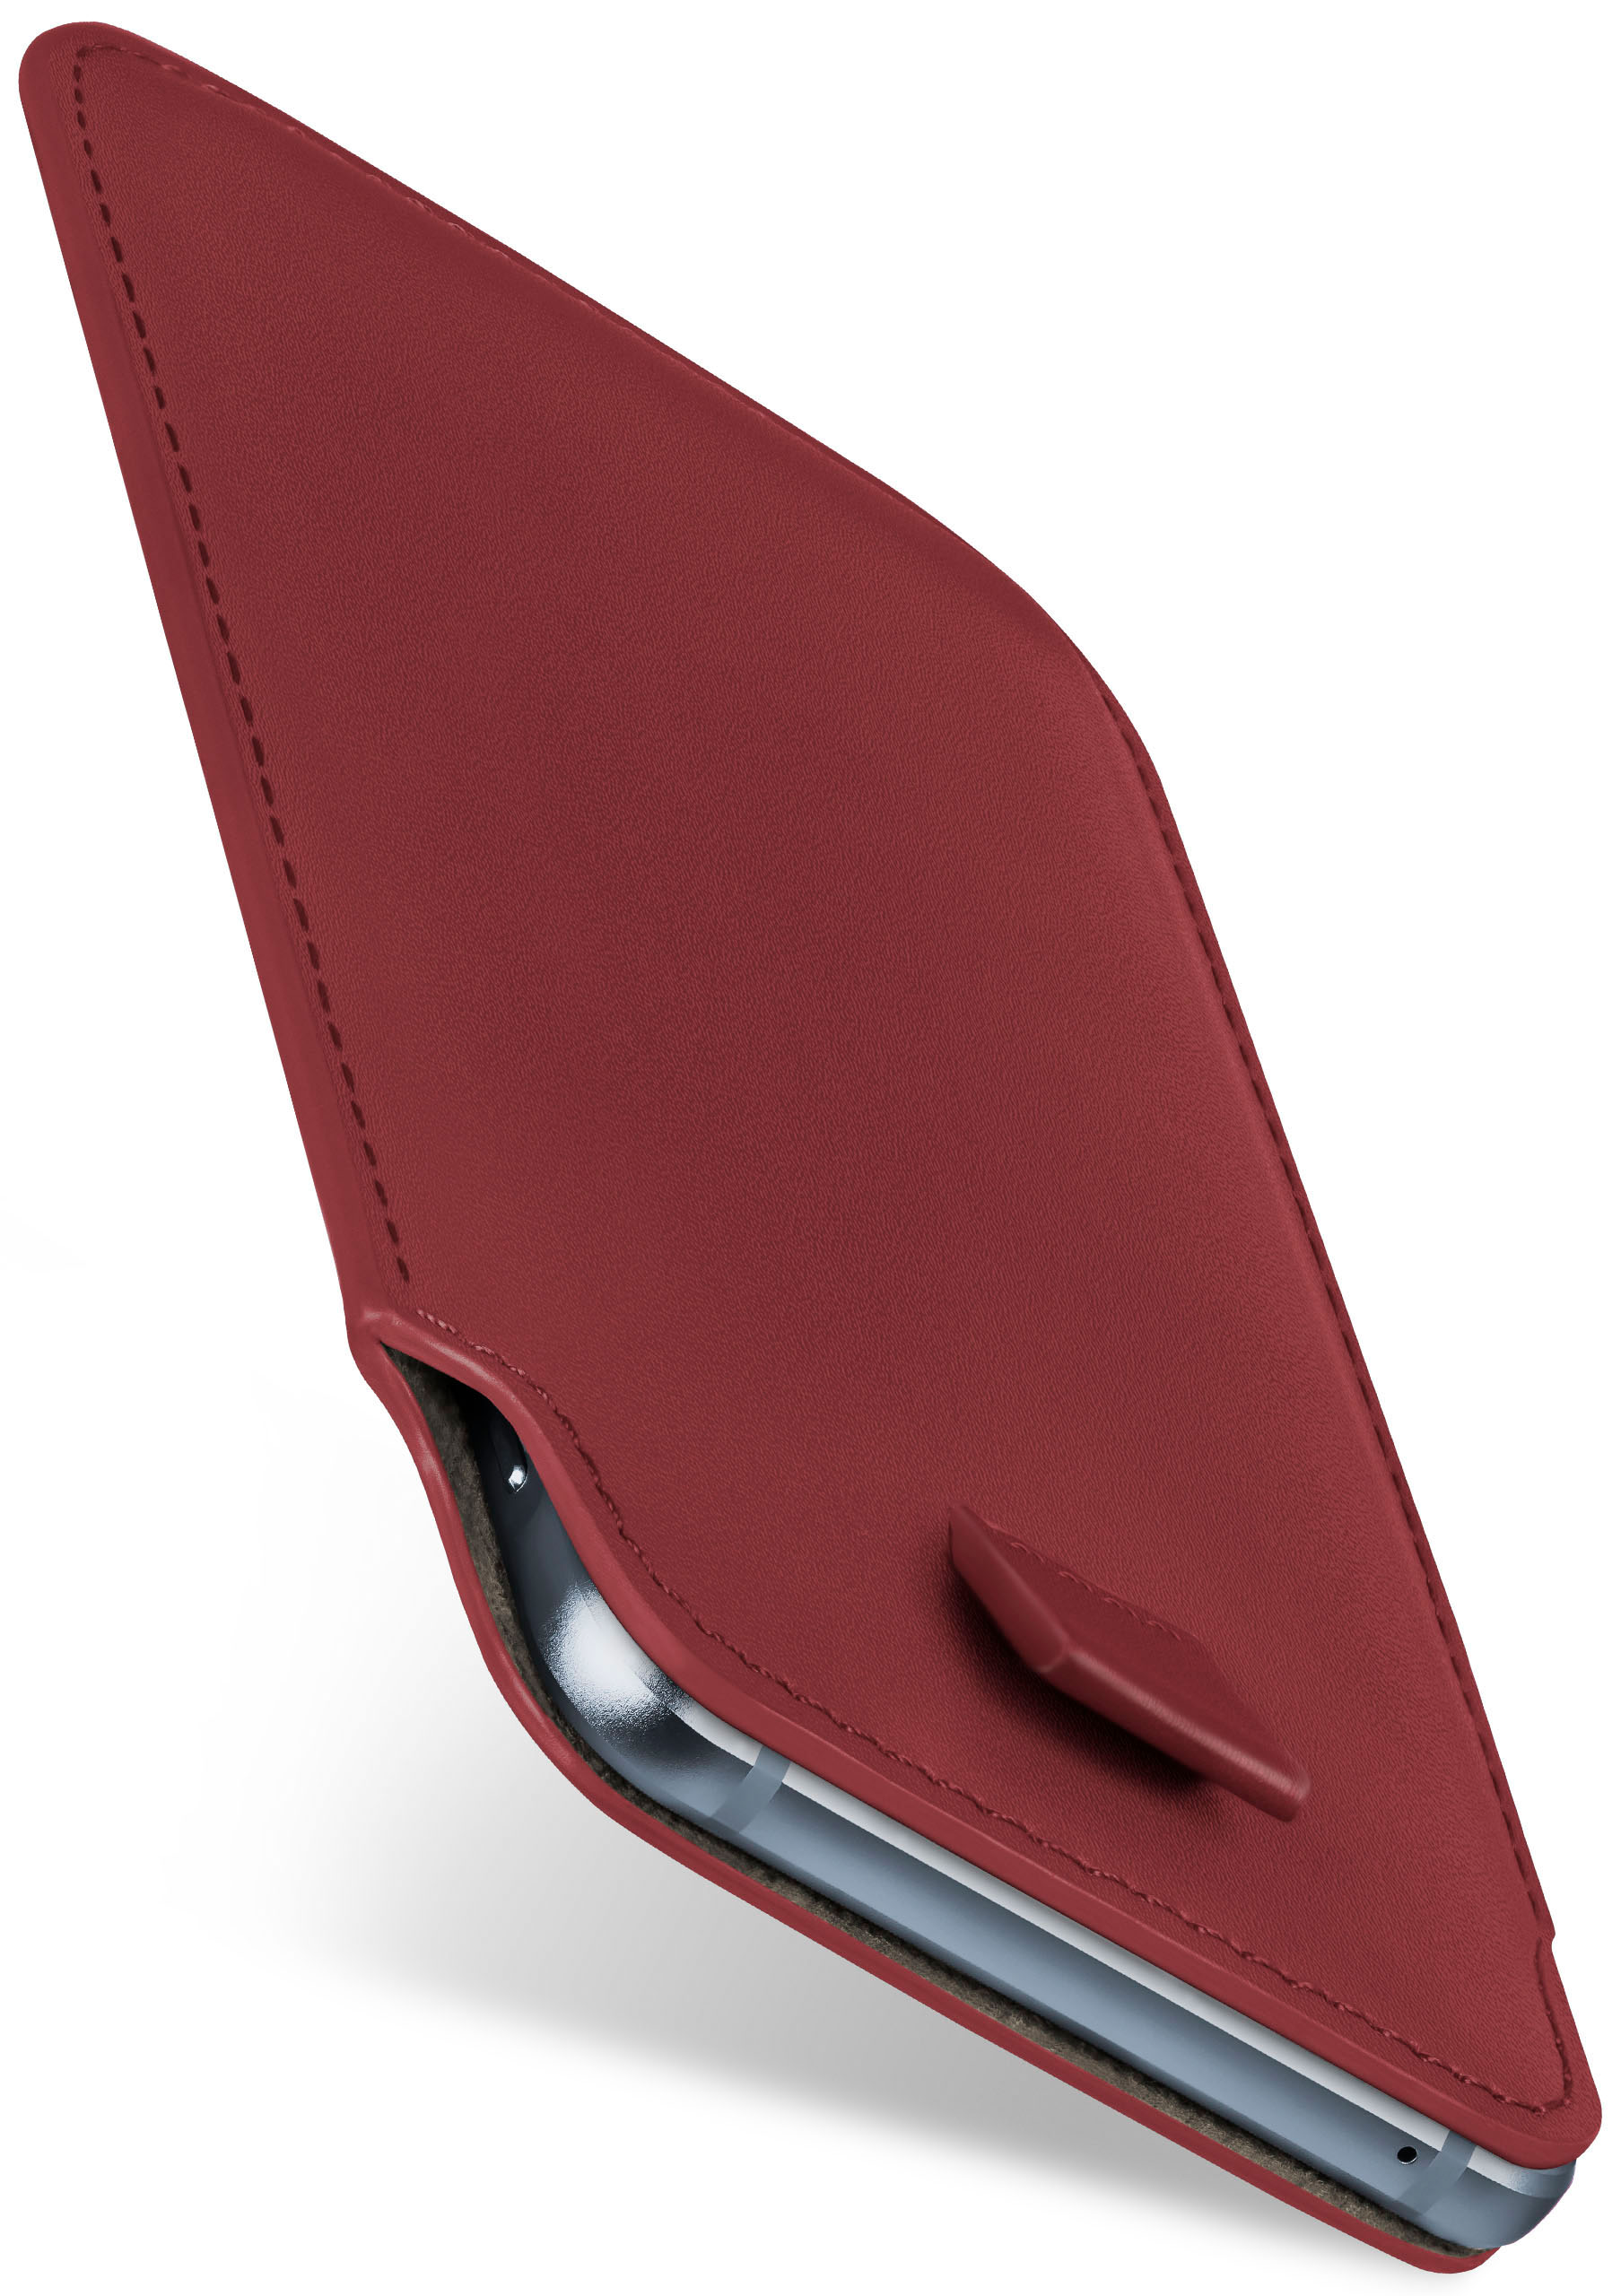 MOEX Slide Case, Full Xperia Cover, Maroon-Red L2, Sony